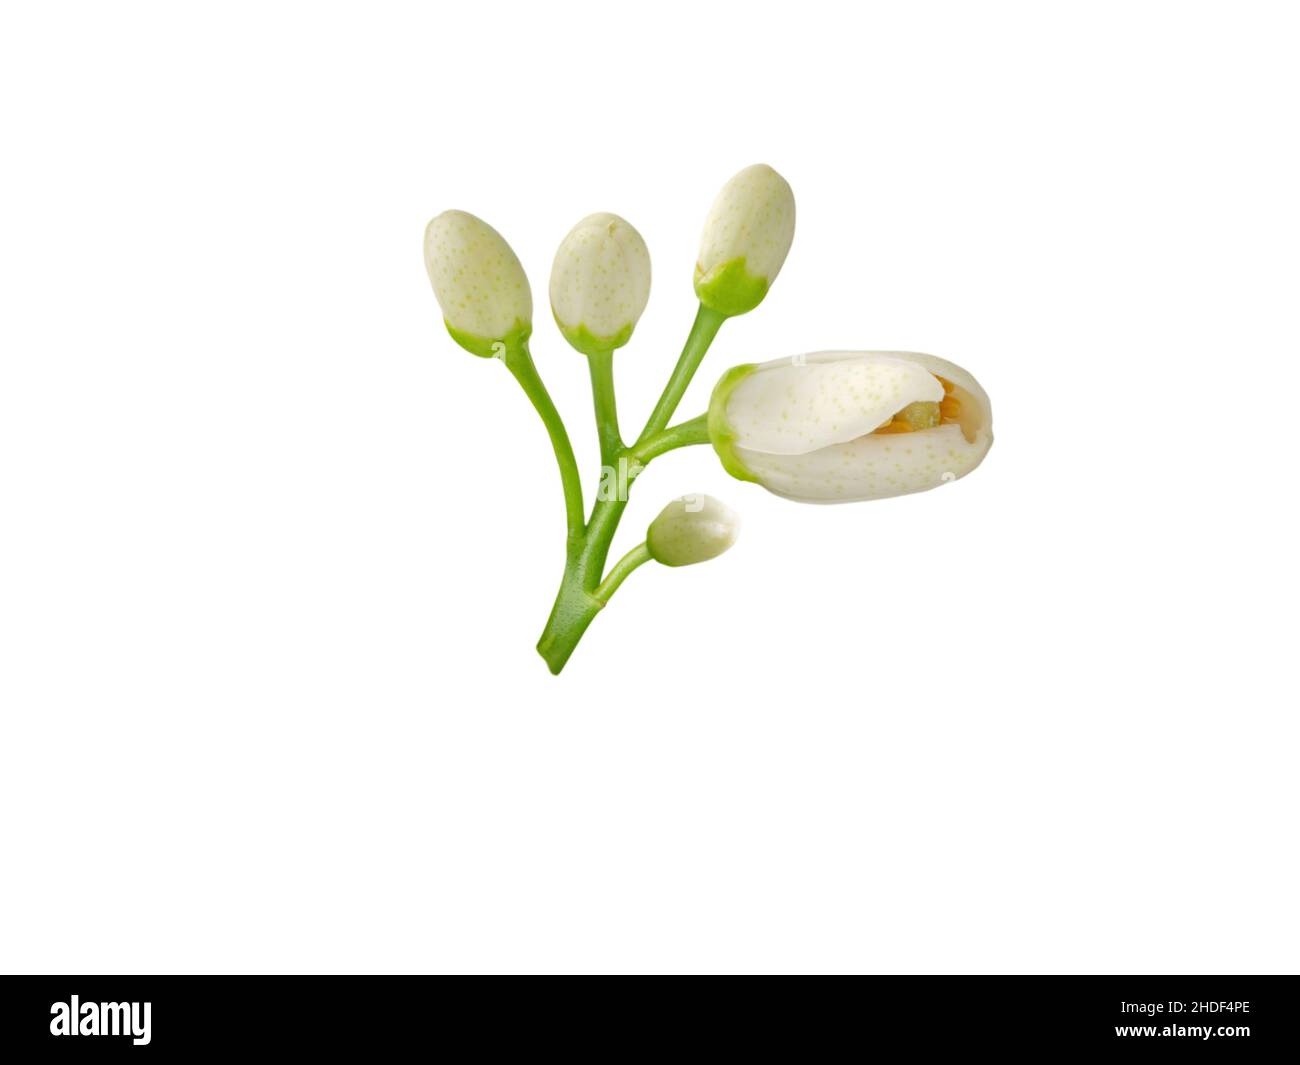 Orange blossom white flower and buds isolated on white. Citrus tree bloom. Blooming neroli. Stock Photo